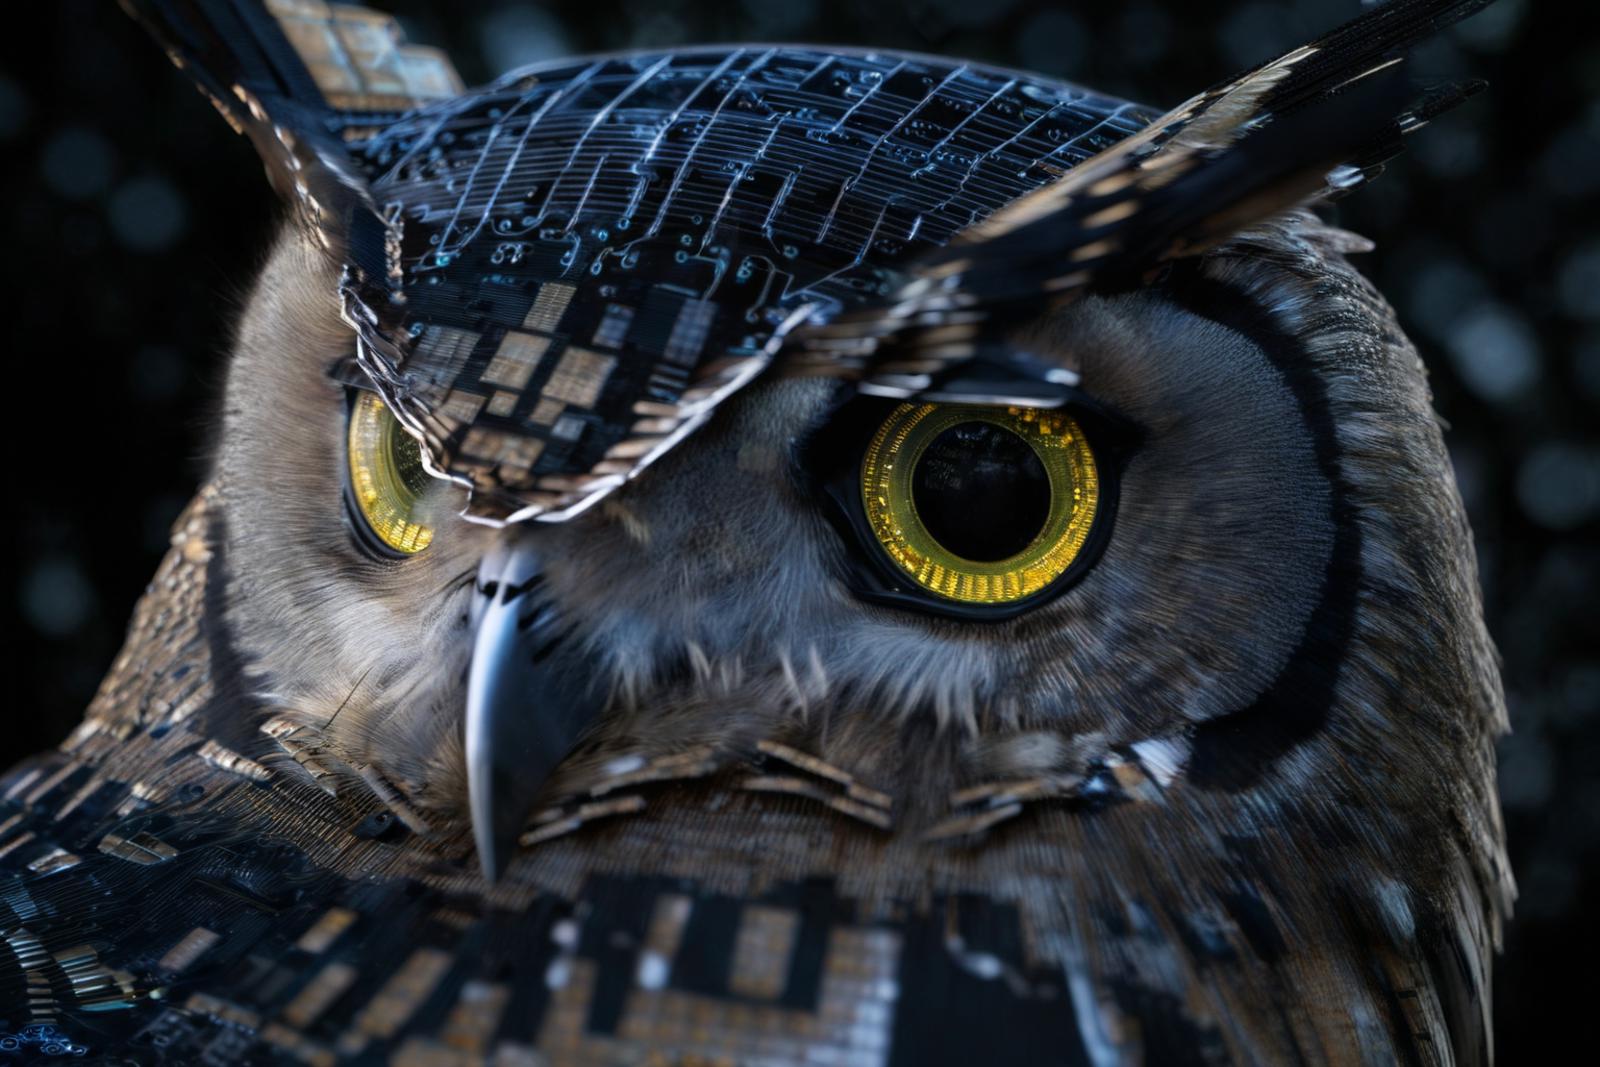 An owl with yellow eyes and a metal helmet on its head.